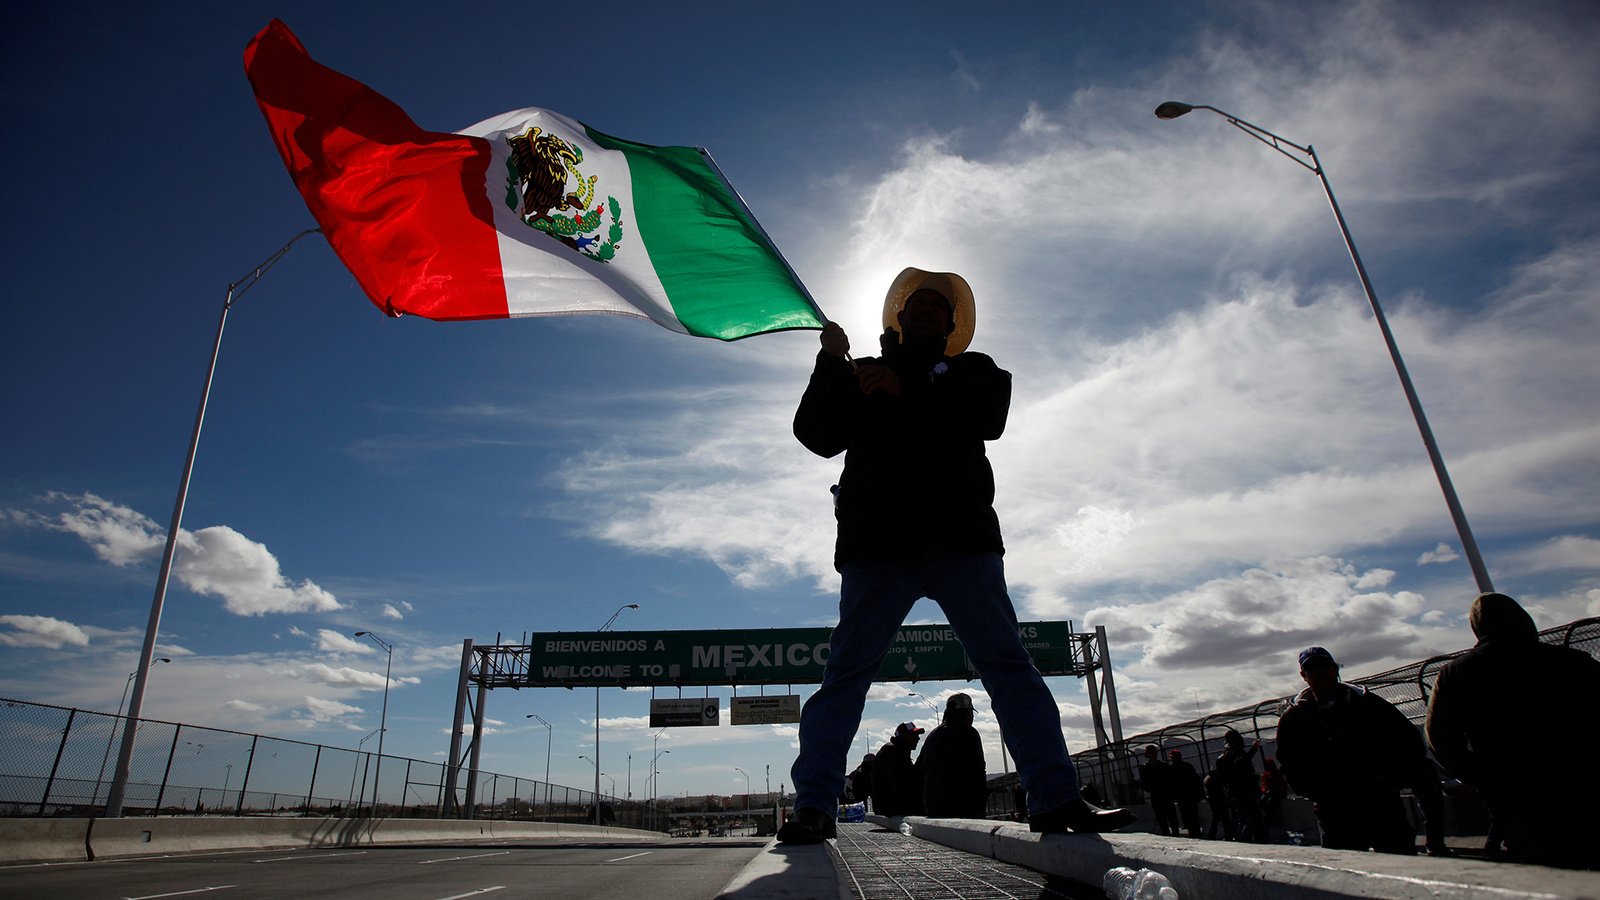 Crossing the U.S. - Mexico Border by Land